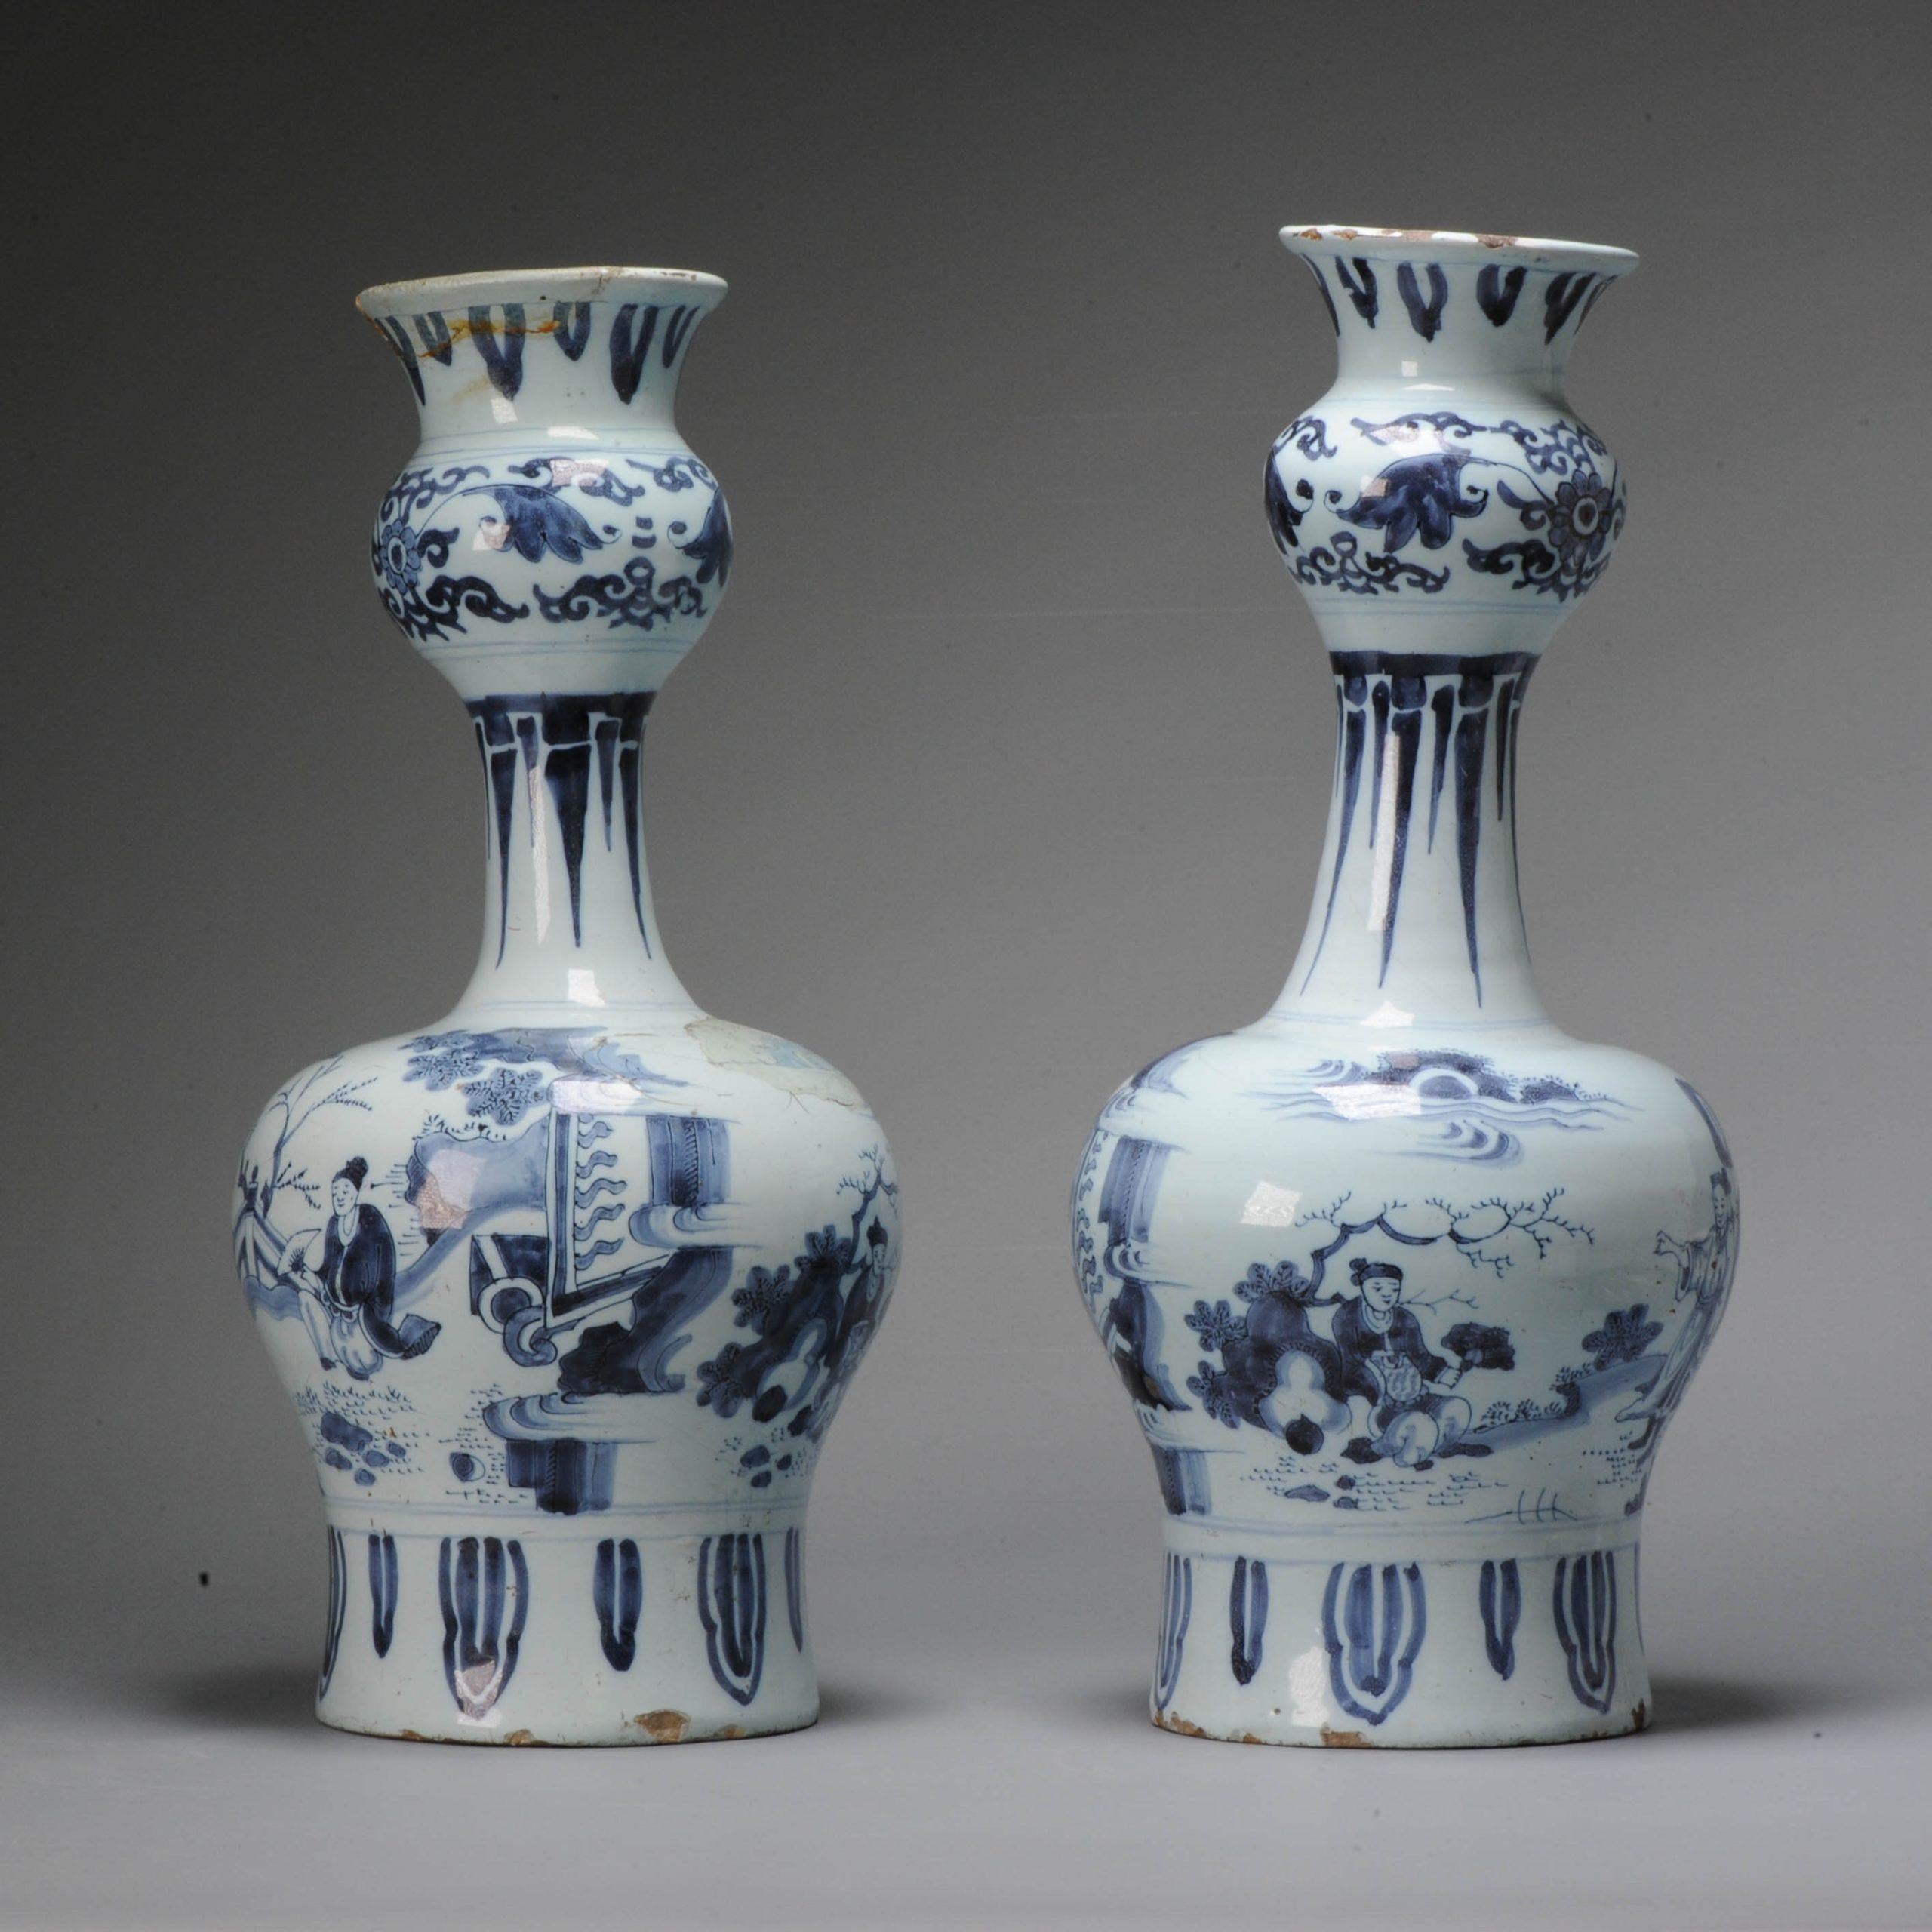 Porcelain Unusual Dutch Delftware Figural Earthenware Vases in Chinese Transitional Style For Sale